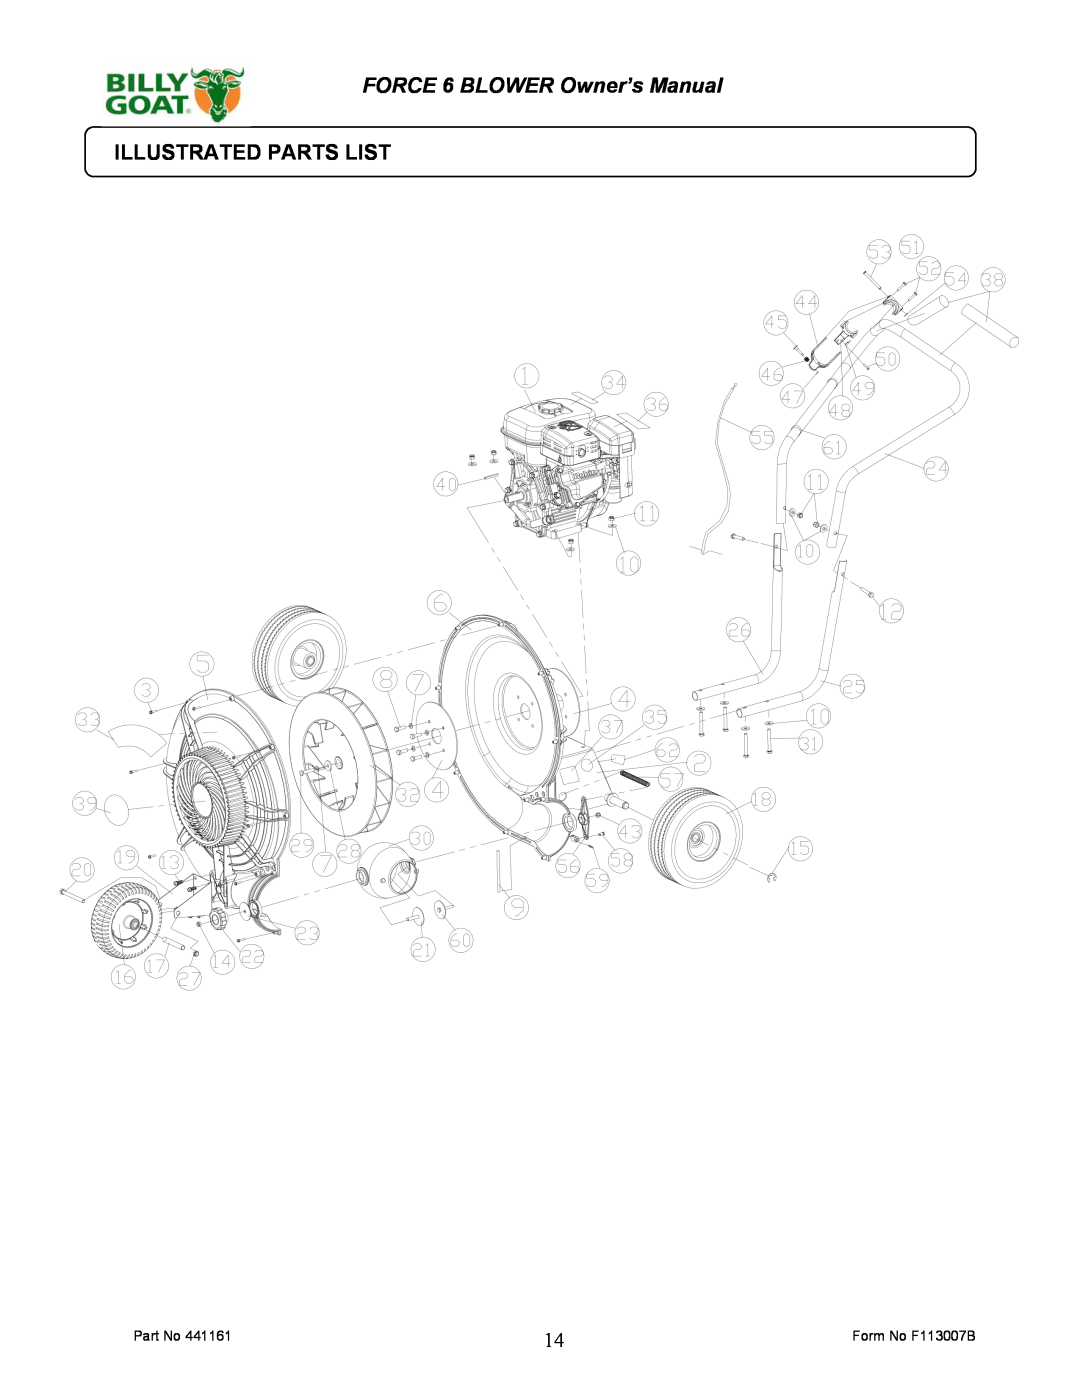 Billy Goat F601S owner manual Illustrated Parts List 